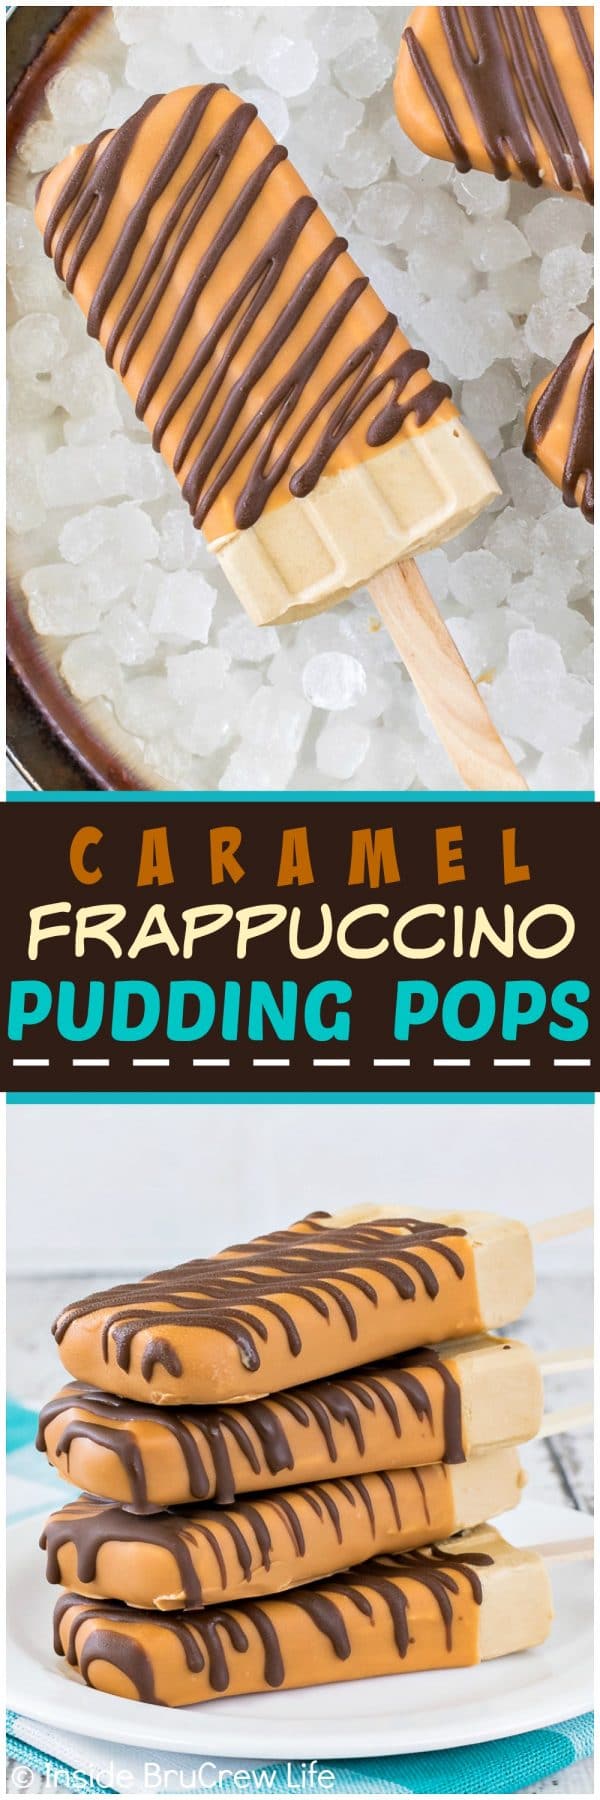 Caramel Frappuccino Pudding Pops - caramel magic shell gives these creamy coffee popsicles a fun crunch. This easy no bake dessert recipe is perfect for hot summer days!